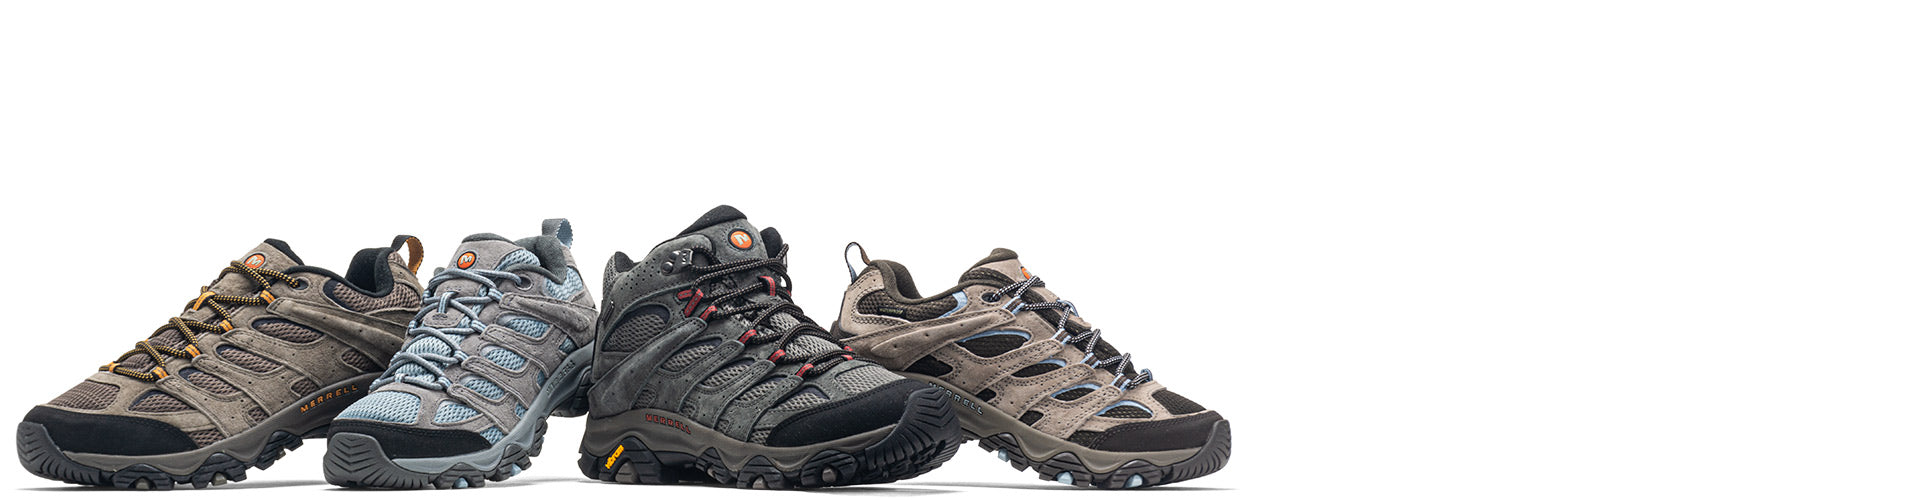 merrell moab 3 hiking shoes low, mid and waterproof versions on white background